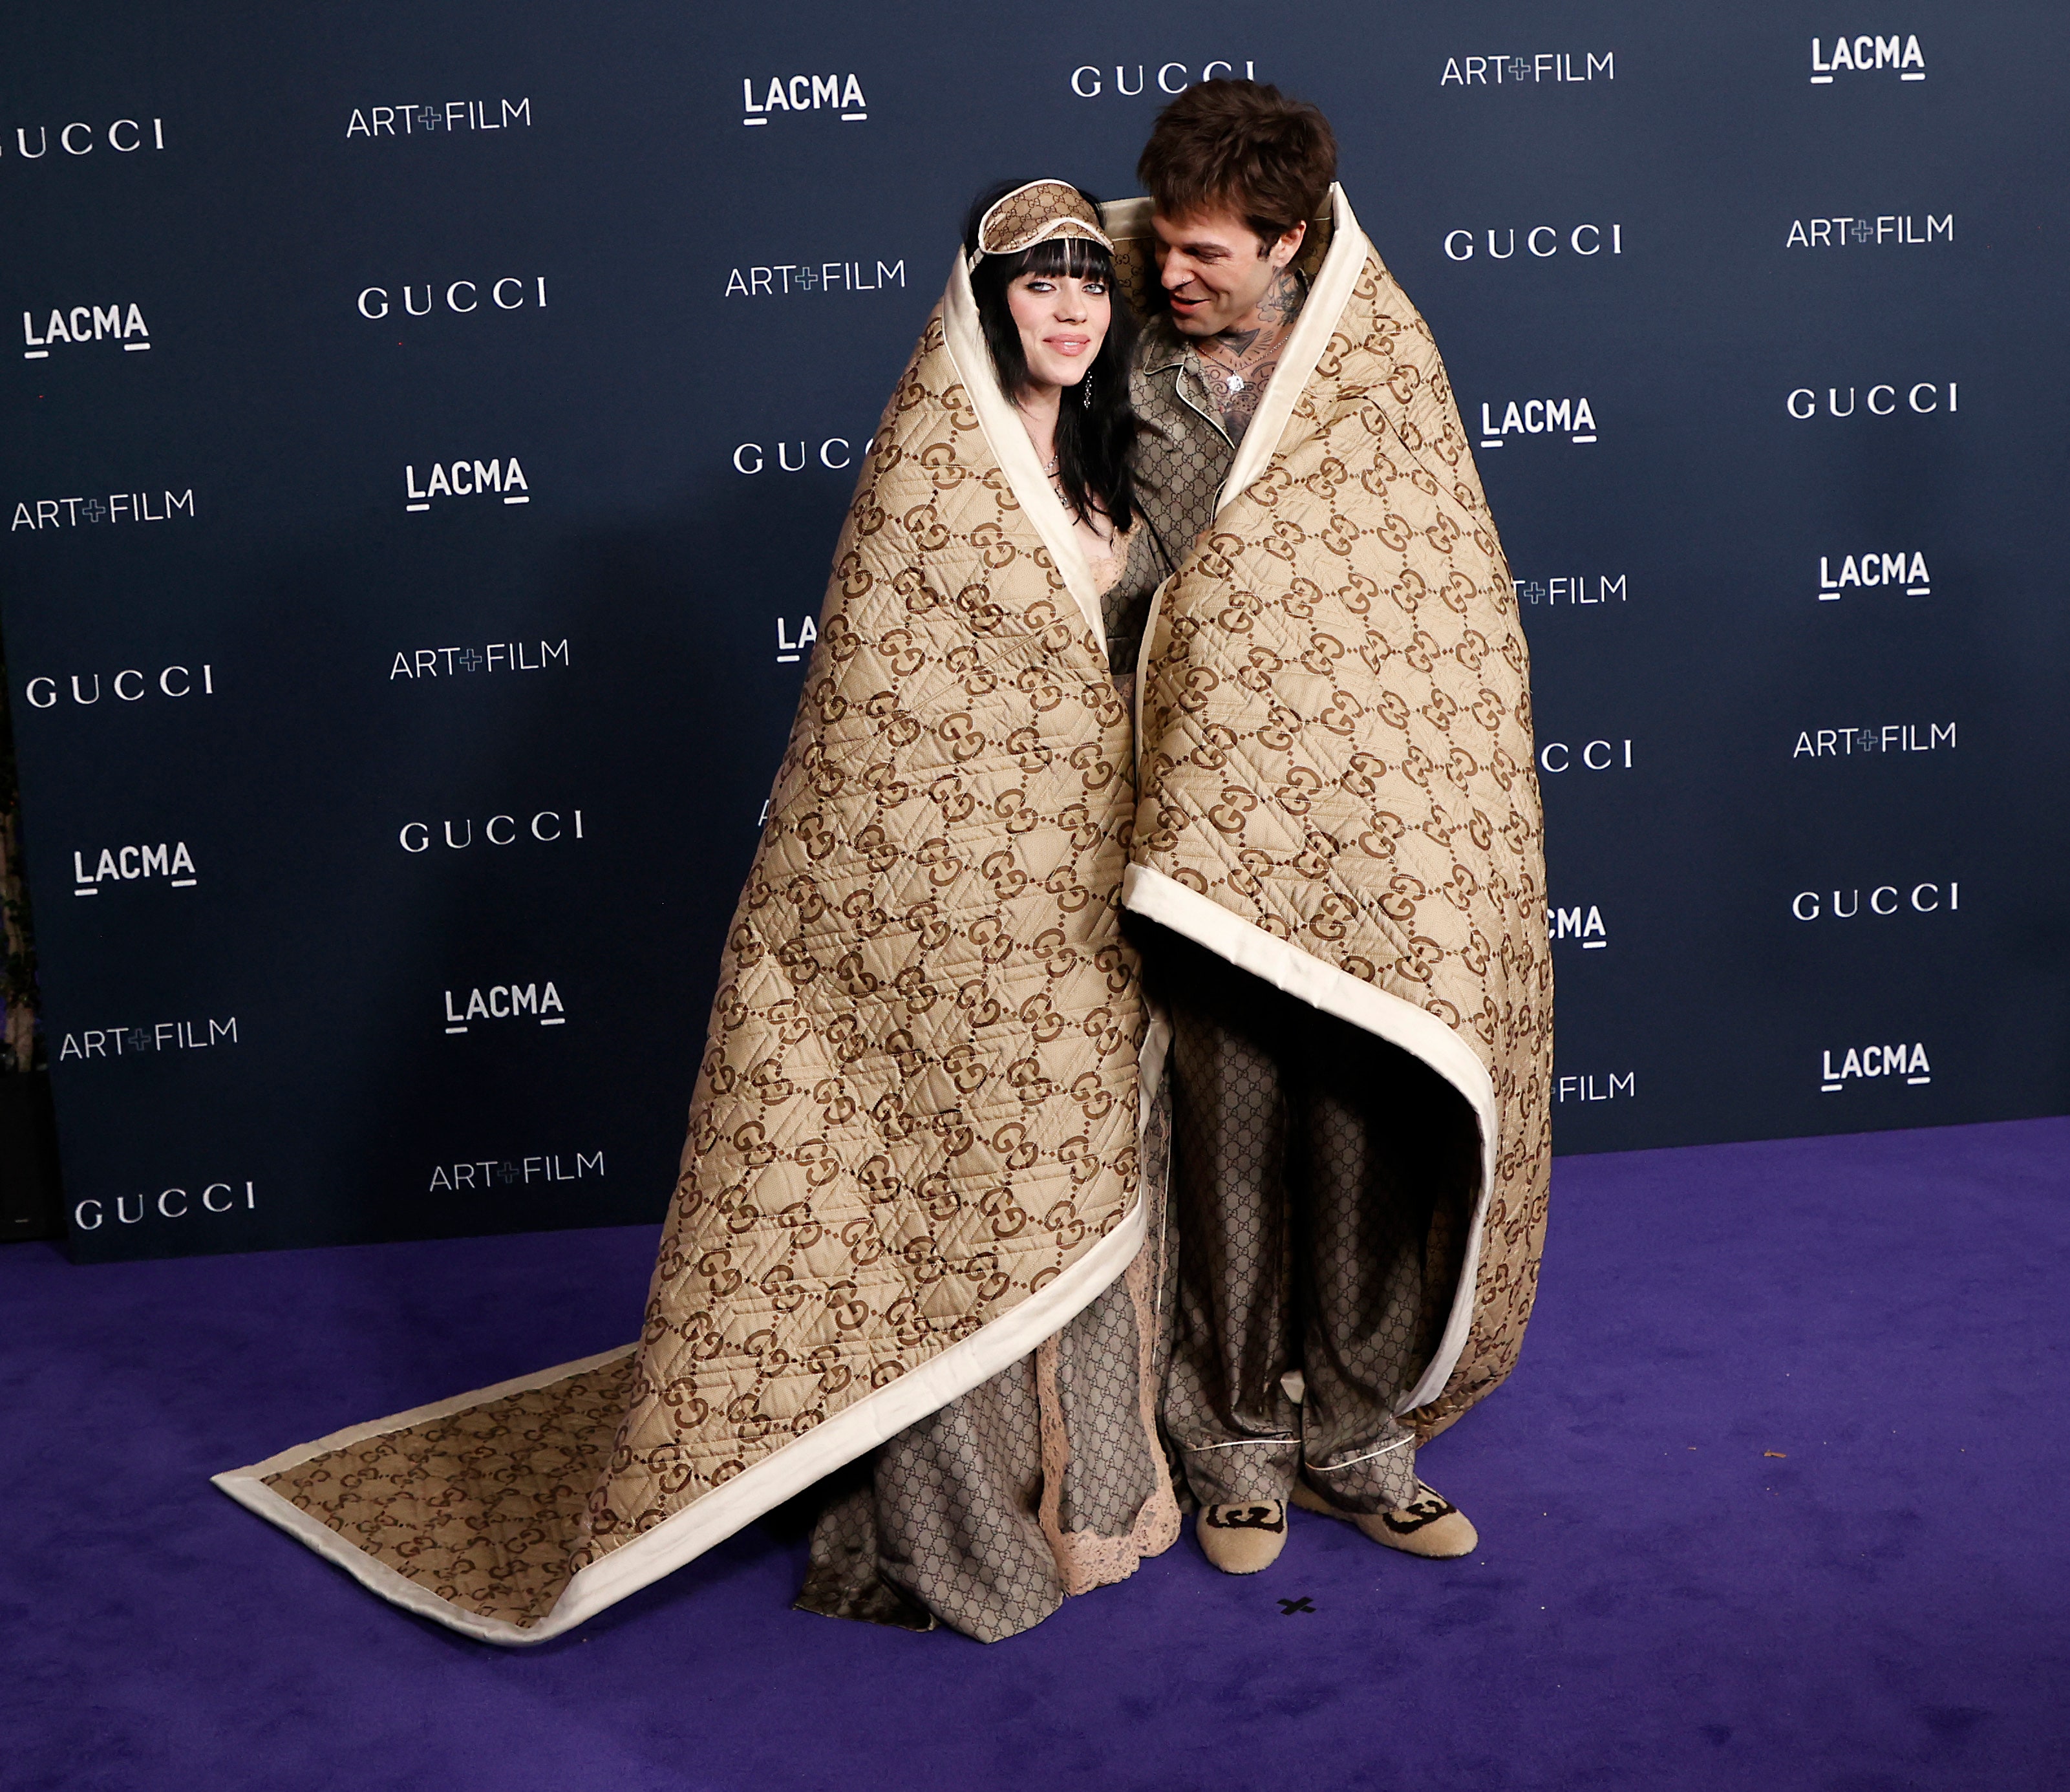 Billie Eilish and Jesse Rutherford Make Their Red Carpet Debut in PJs | Vogue